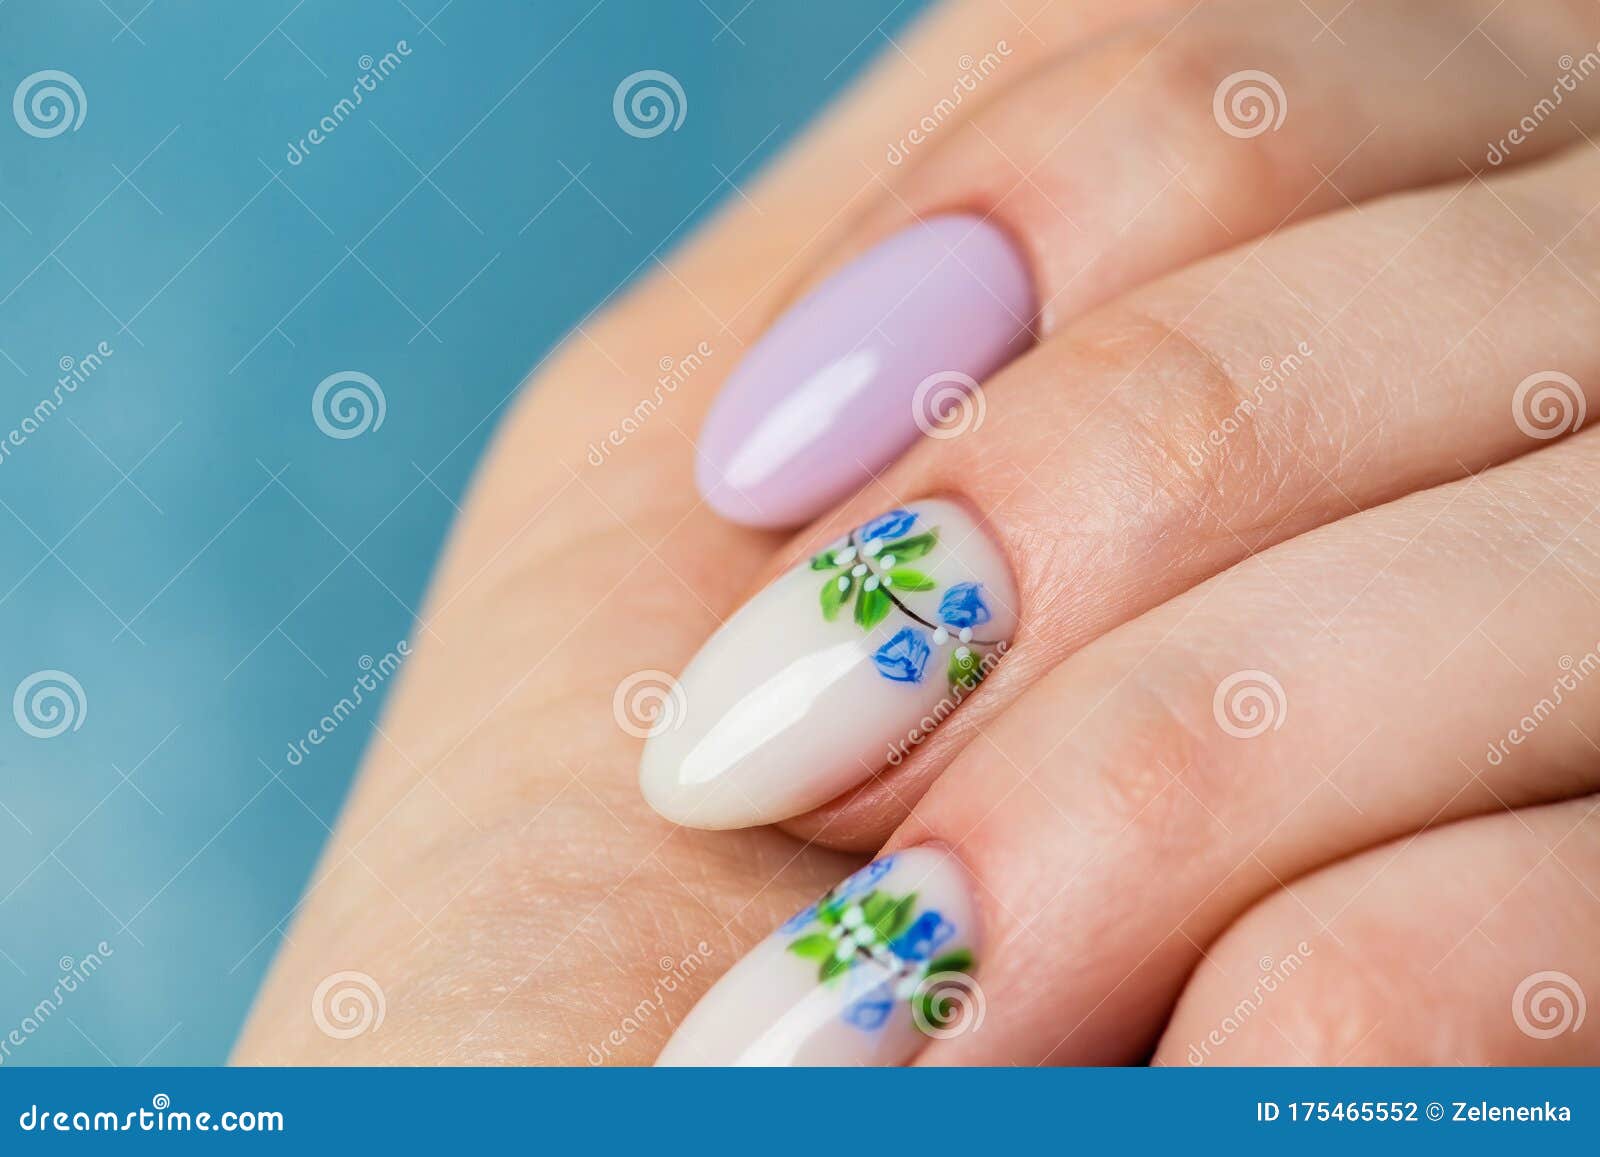 Nails Design. Hands with Bright Lilac and White Manicure with ...